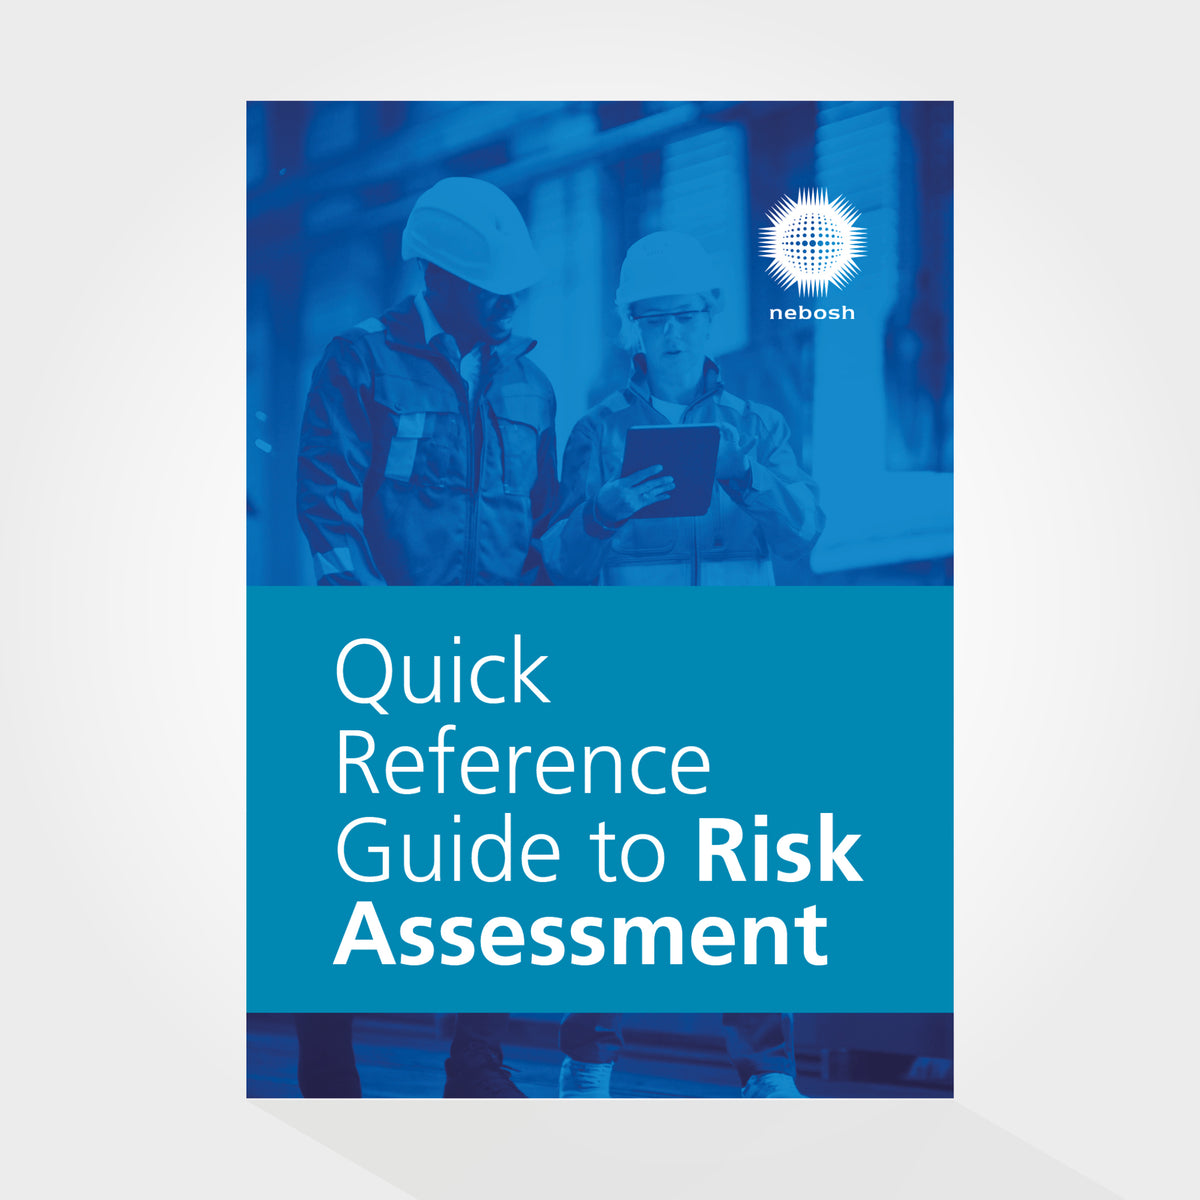 Quick Reference Guide to Risk Assessment